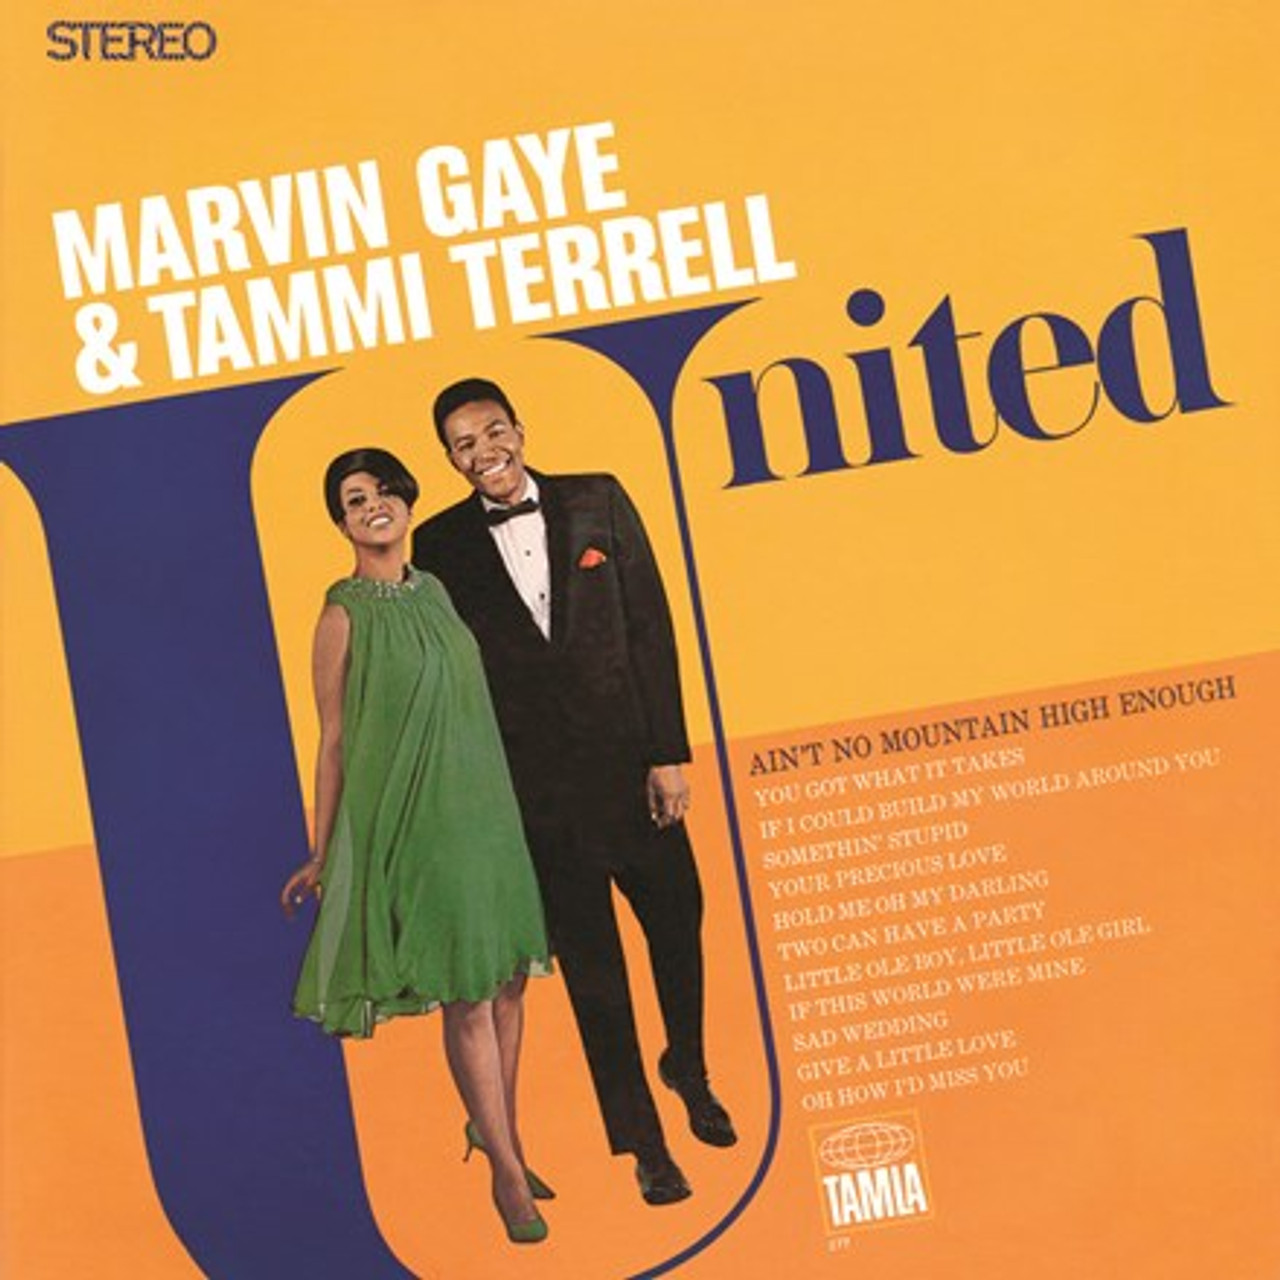 Marvin Gaye and Tammi Terrell - United (180g Vinyl LP) - Music Direct